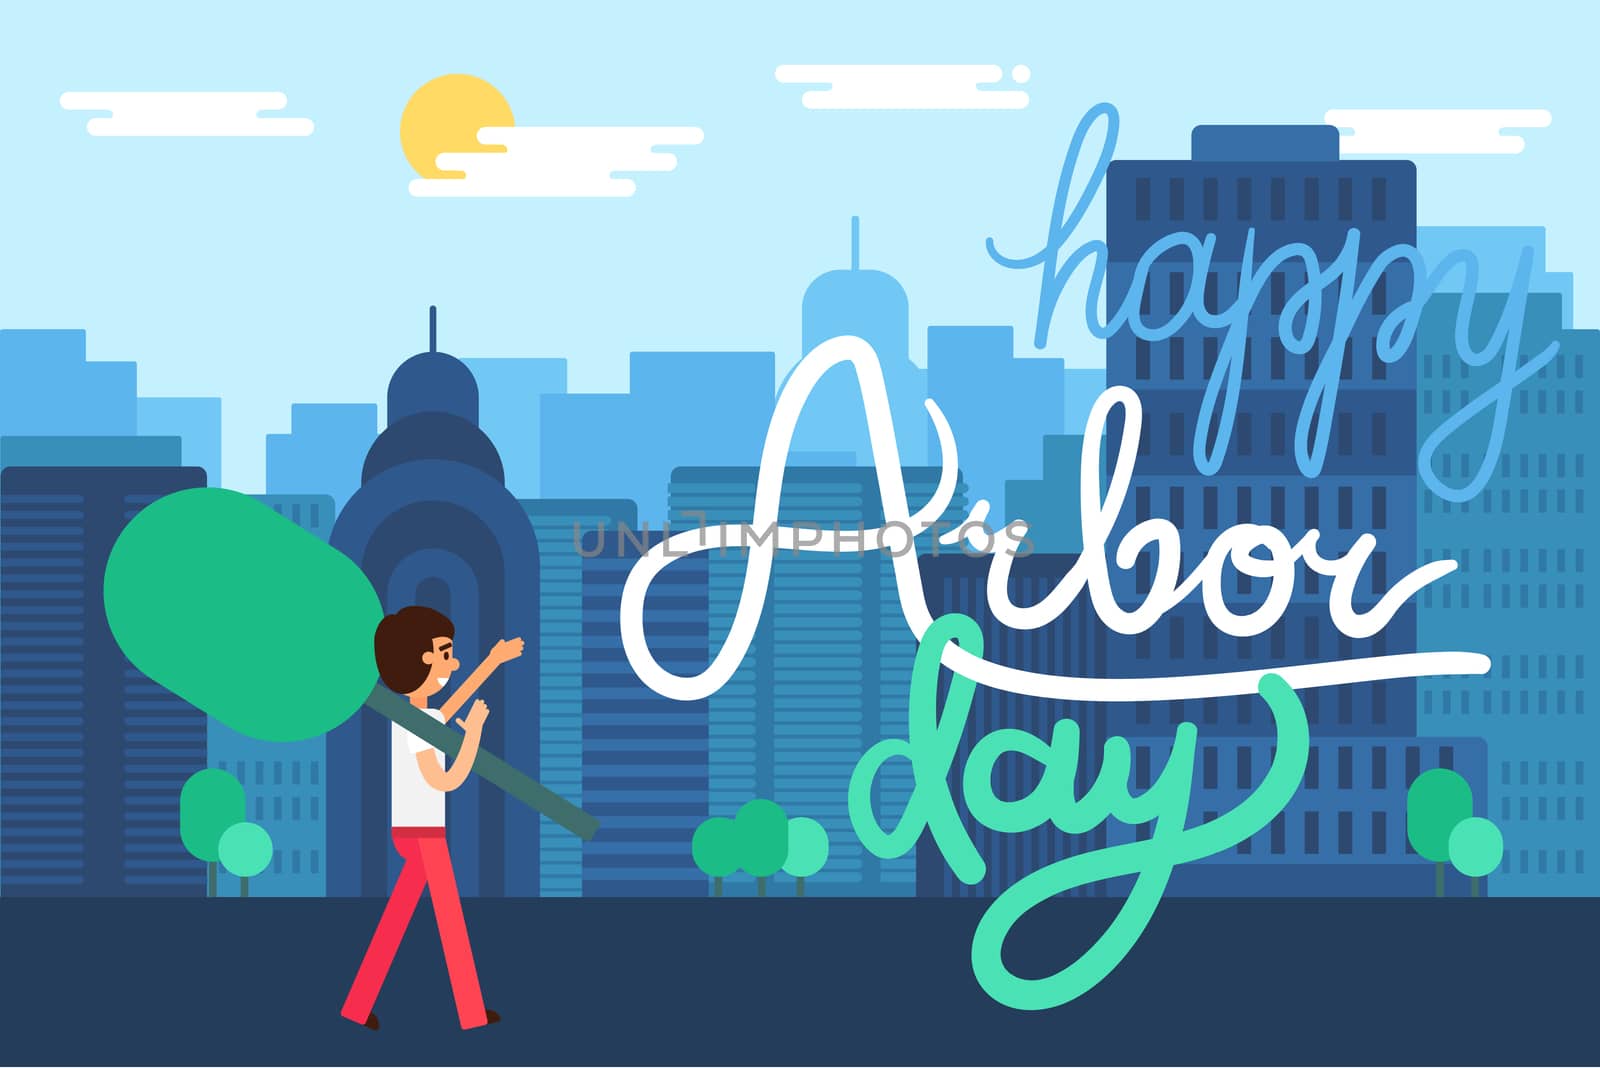 Arbor Day Greeting by barsrsind